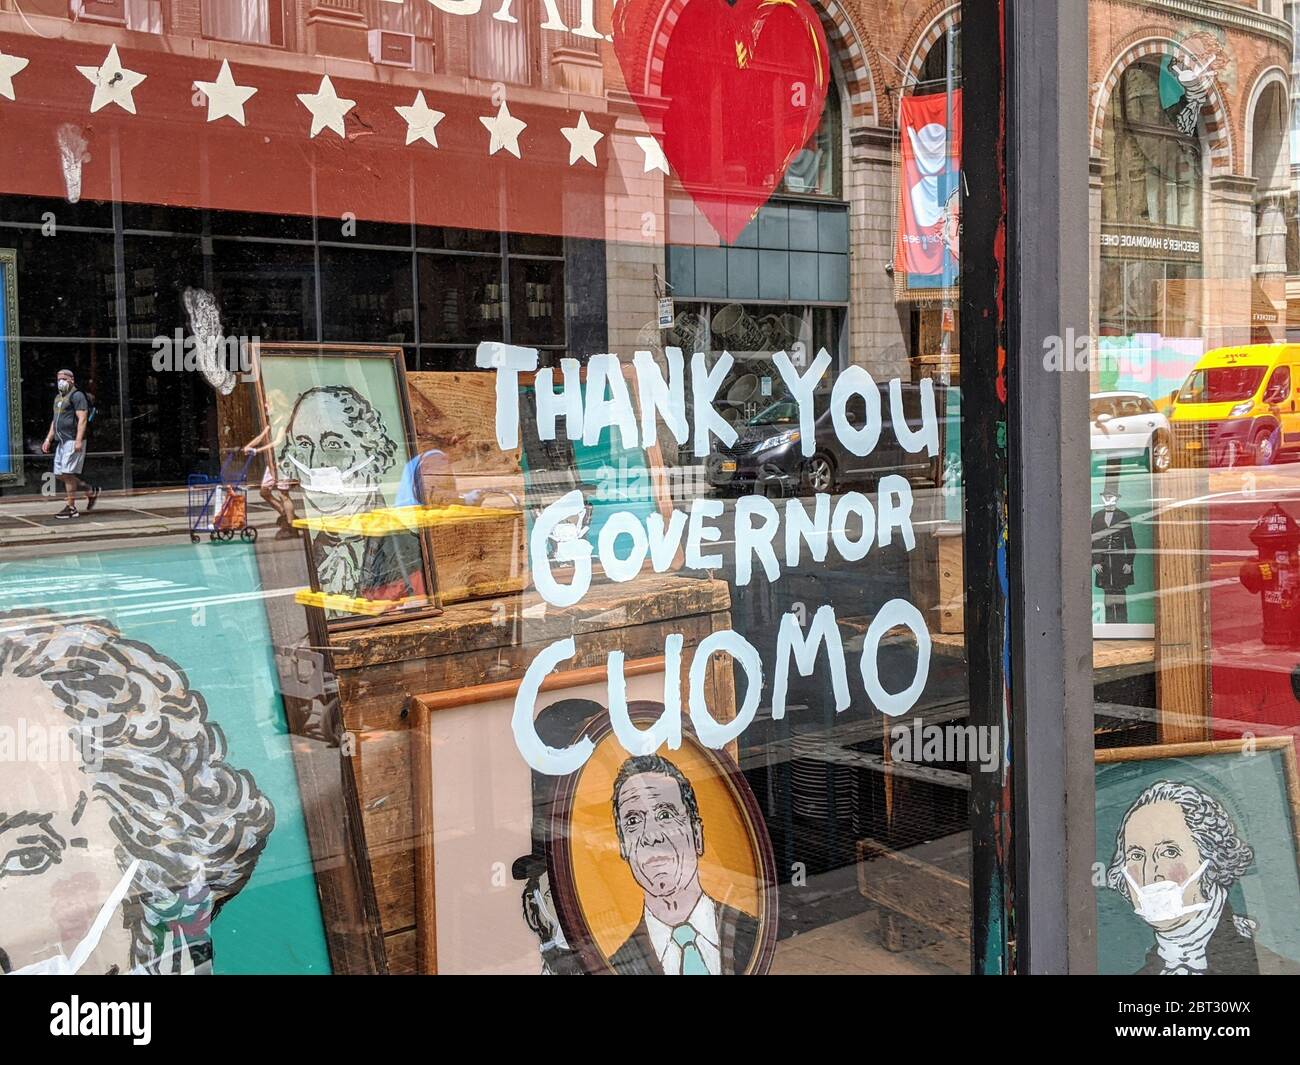 Sign in a store window thanking Governor Cuomo during the coronavirus pandemic in New York City. Stock Photo